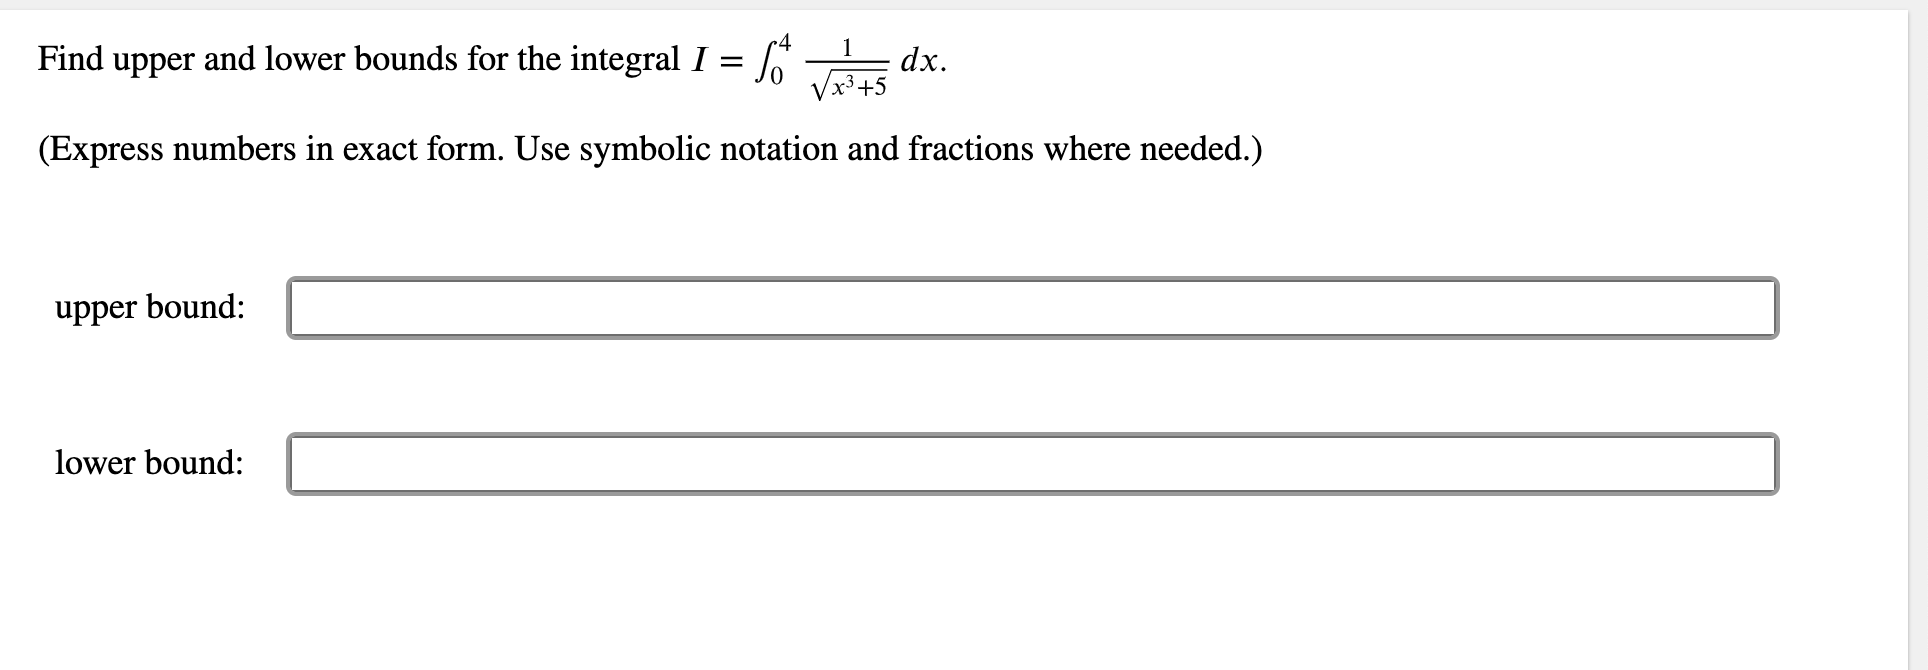 1
Find upper and lower bounds for the integral I =
dx.
x3+5
(Express numbers in exact form. Use symbolic notation and fractions where needed.)
upper bound:
lower bound:
